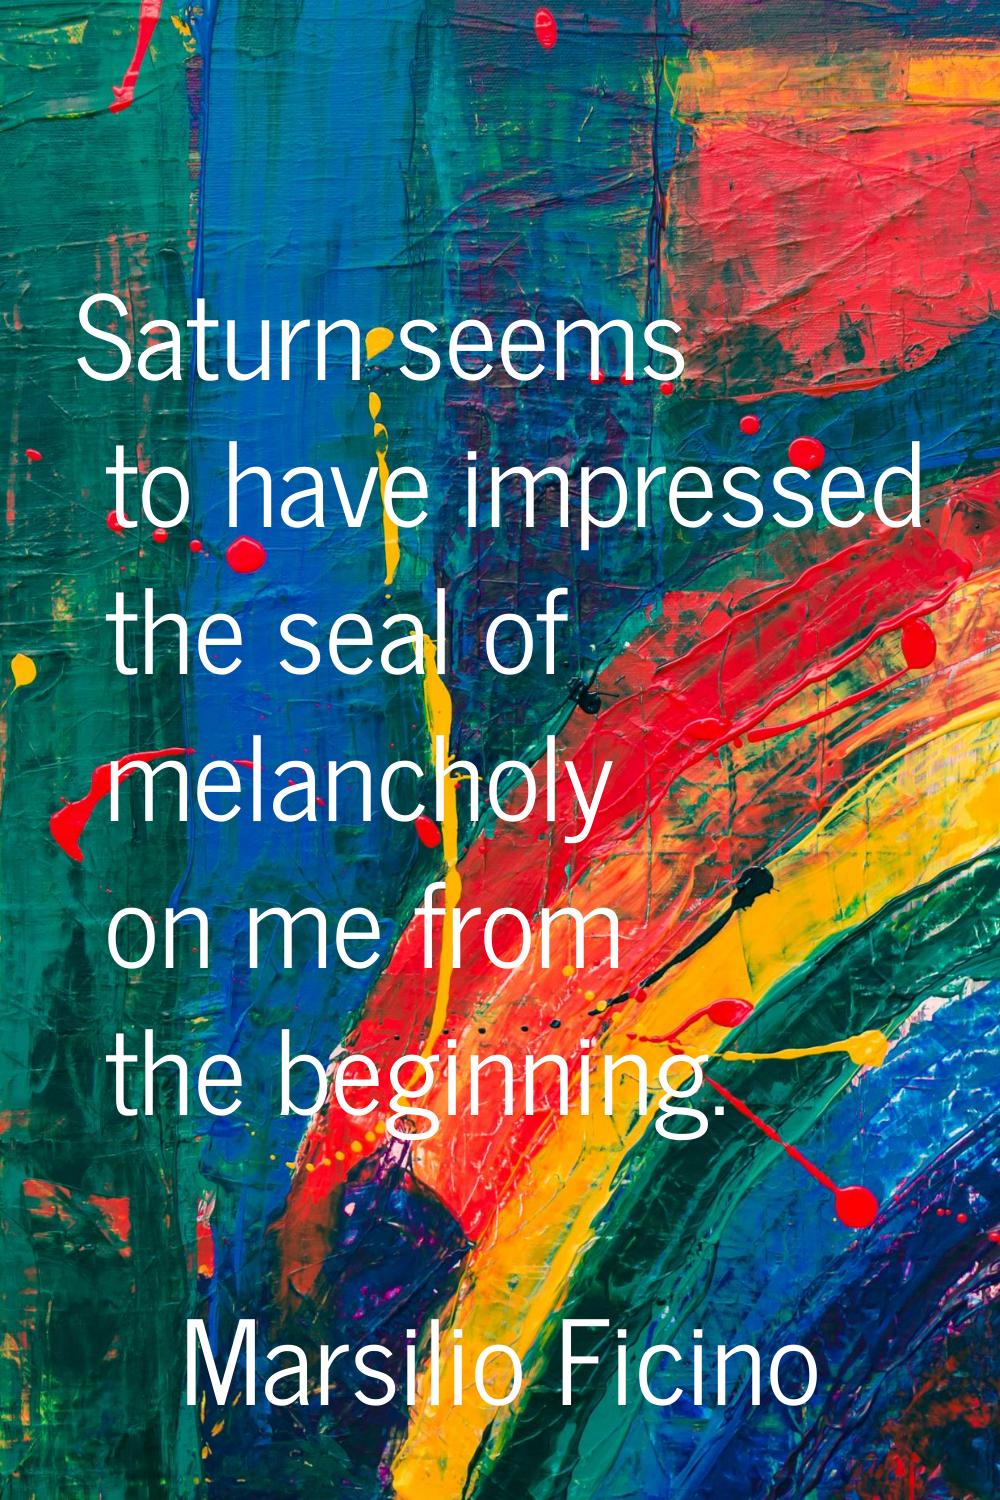 Saturn seems to have impressed the seal of melancholy on me from the beginning.